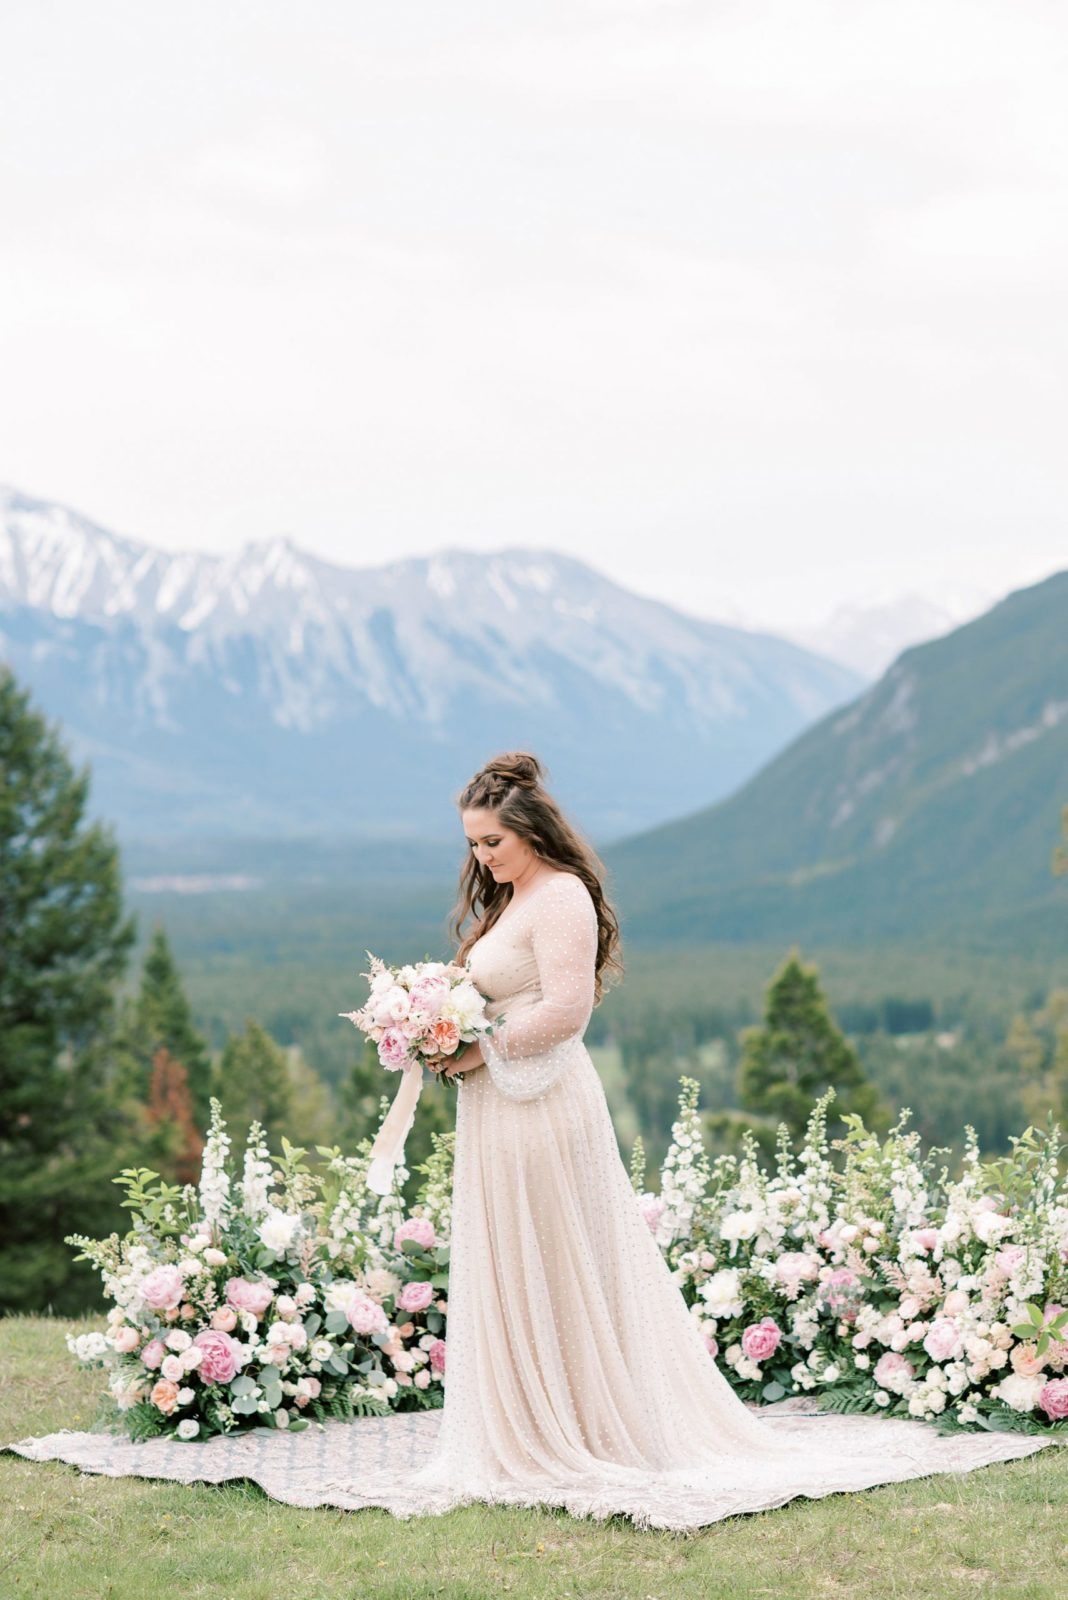 Bride in an oatmeal and blush organza gown by Willowby by Watters holds her blush and pink bouquet at Tunnel Mountain Resevoir in front of a grounded floral arch by Flowers by Janie